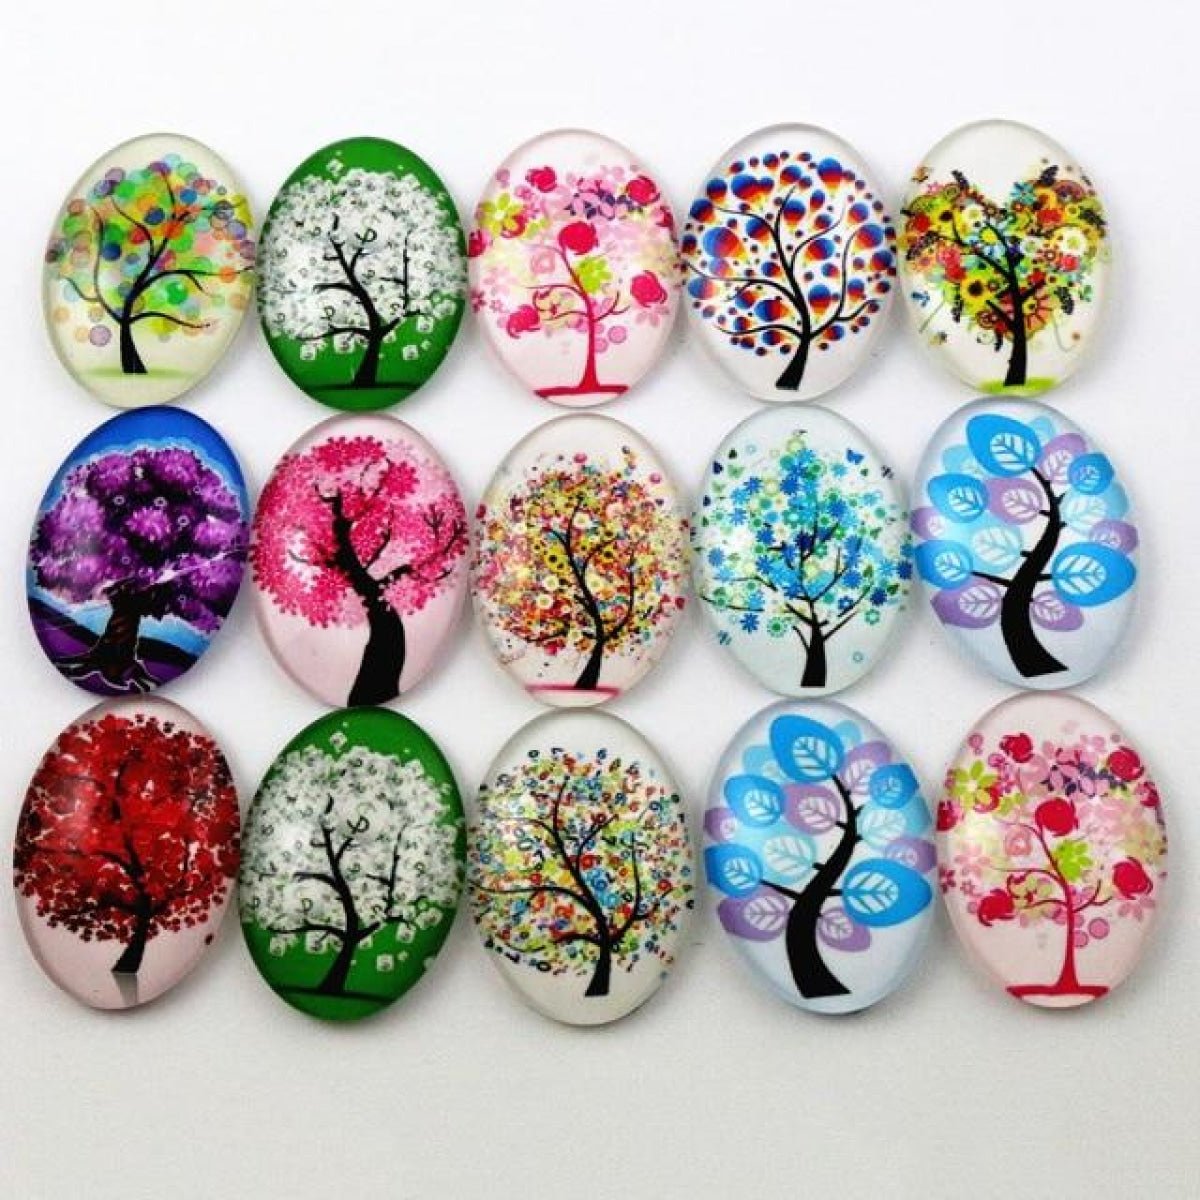 10x Glass Cabochons Flower Tree Life Handmade Oval Shape 18x25mm Jewellery Set A - Swirling Trunks - - Asia Sell